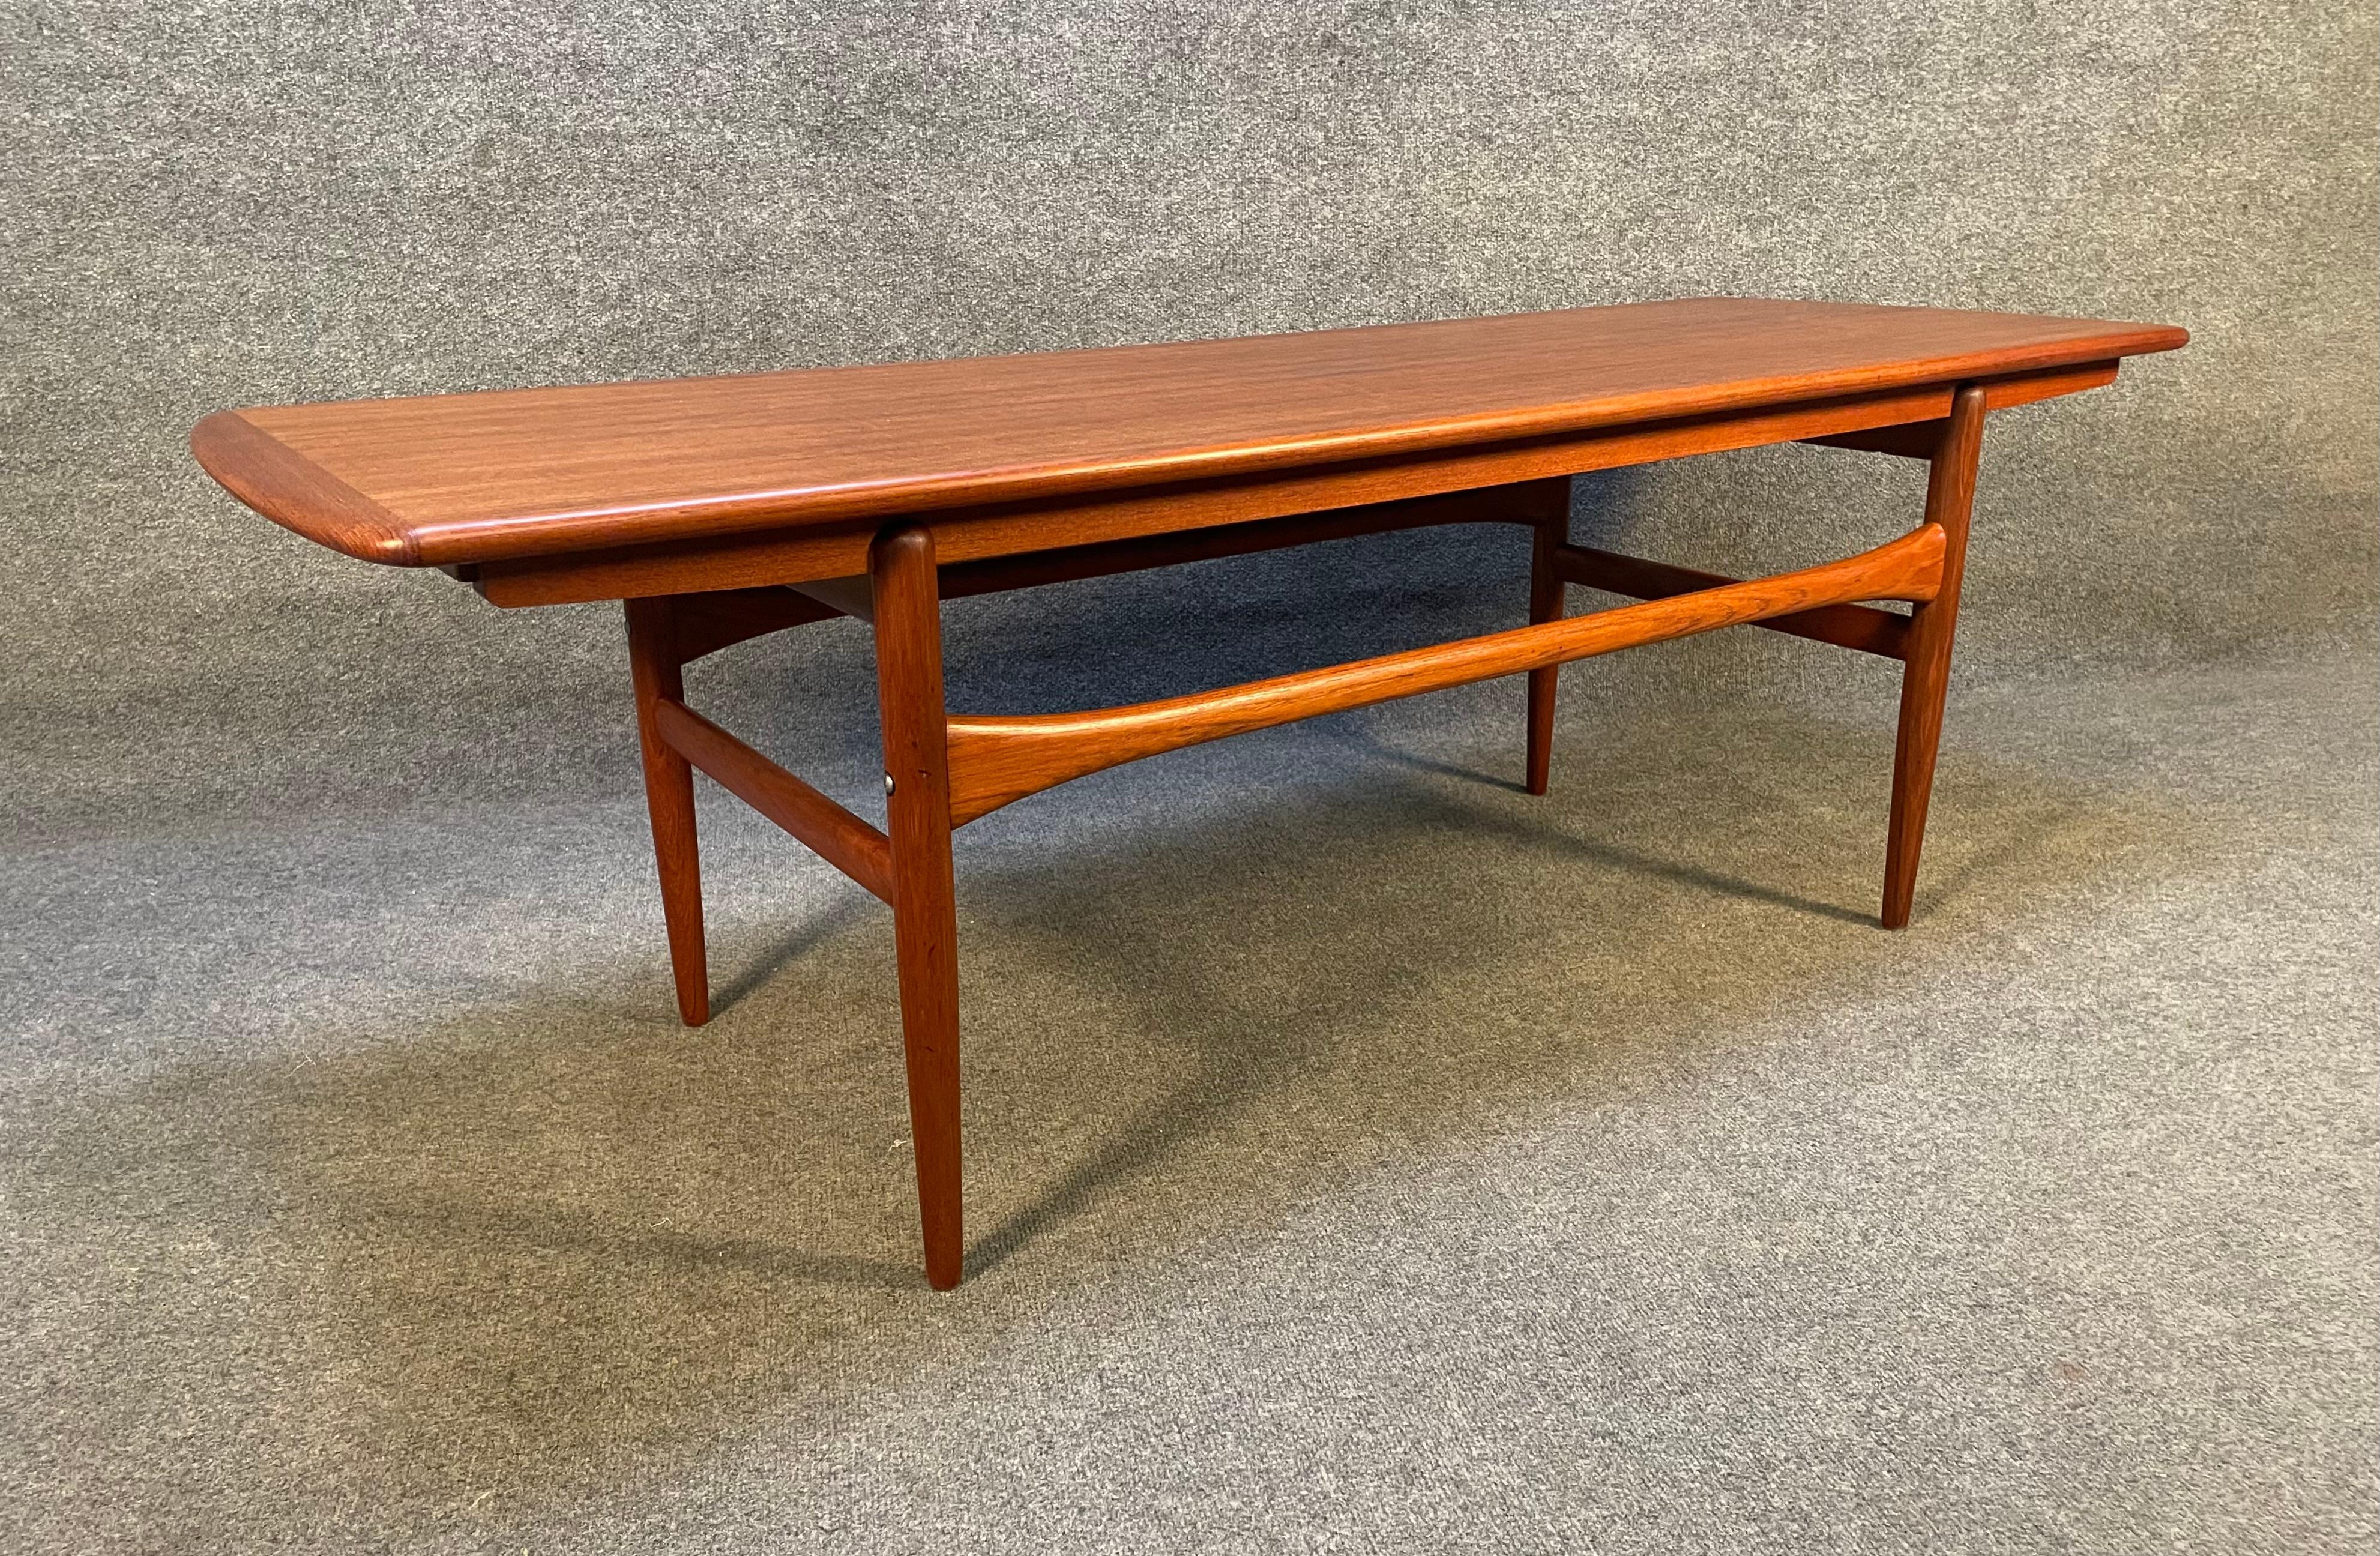 Mid-20th Century Vintage Danish Mid-Century Modern Teak Coffee Table by Arrebro Mobler For Sale